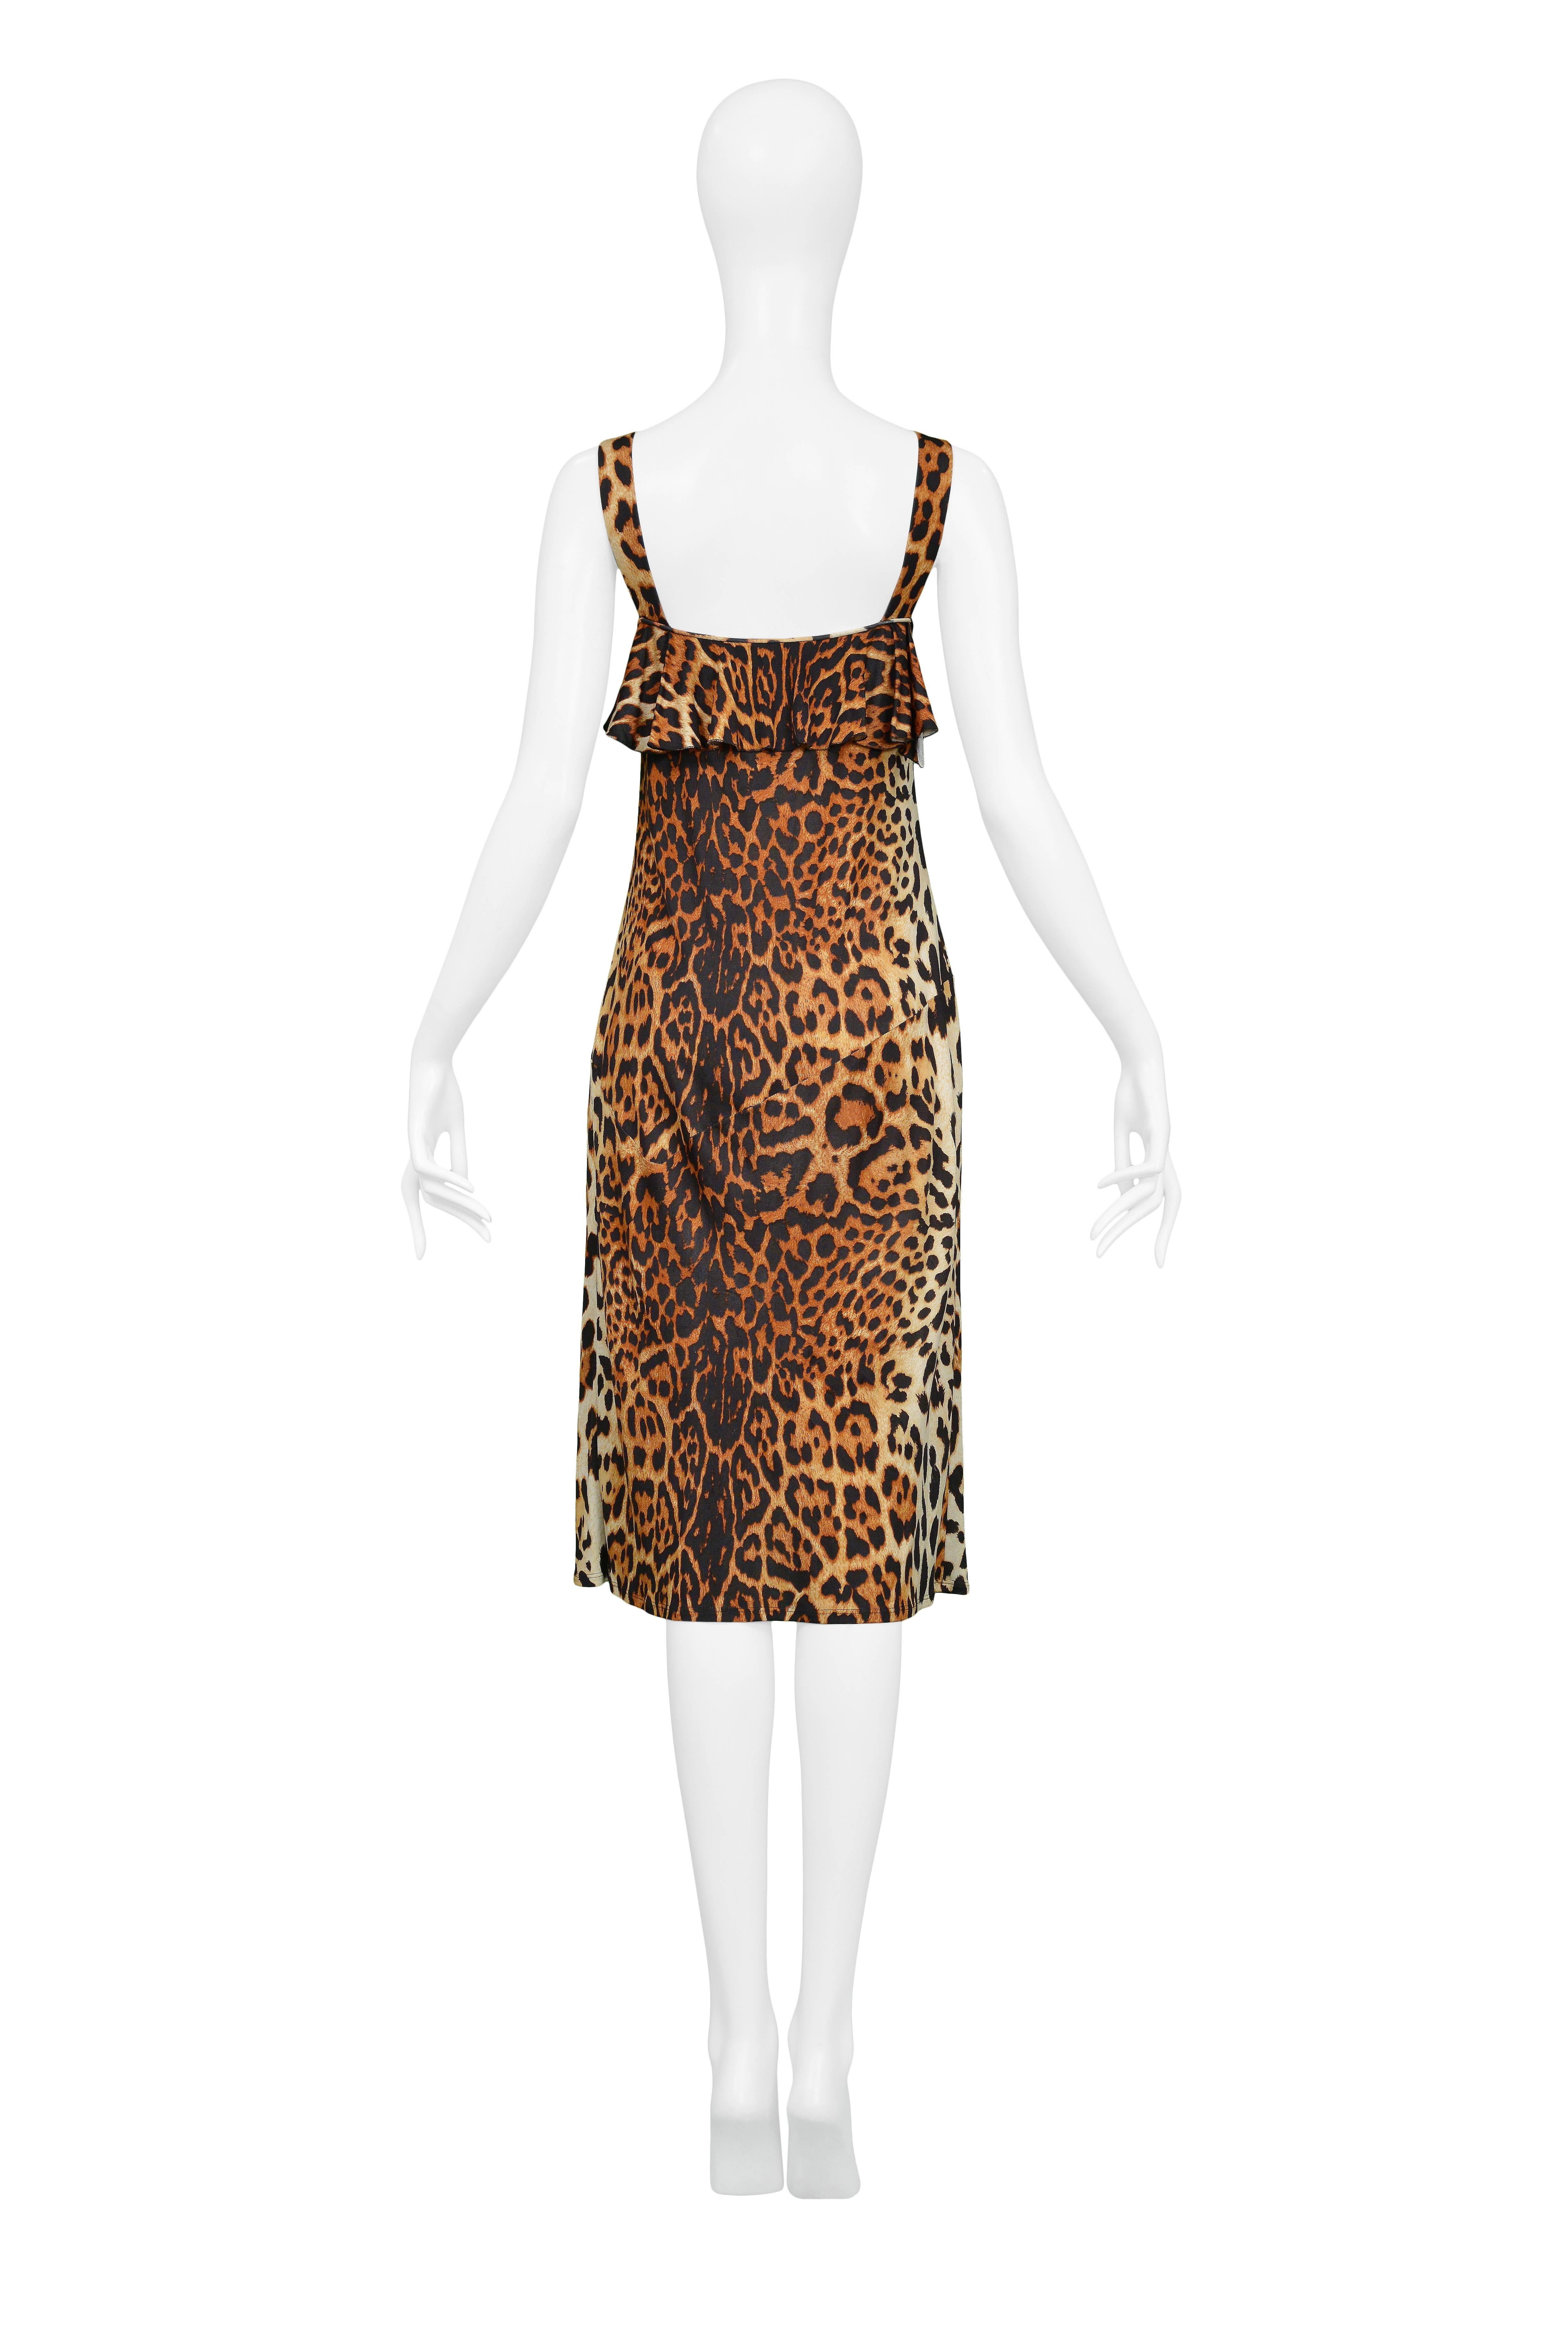 CHRISTIAN DIOR

LEOPARD DISCO DRESS WITH METAL LOGO HARDWARE
Condition : Excellent Vintage Condition
Vintage Dior by John Galliano leopard jersey disco dress with 